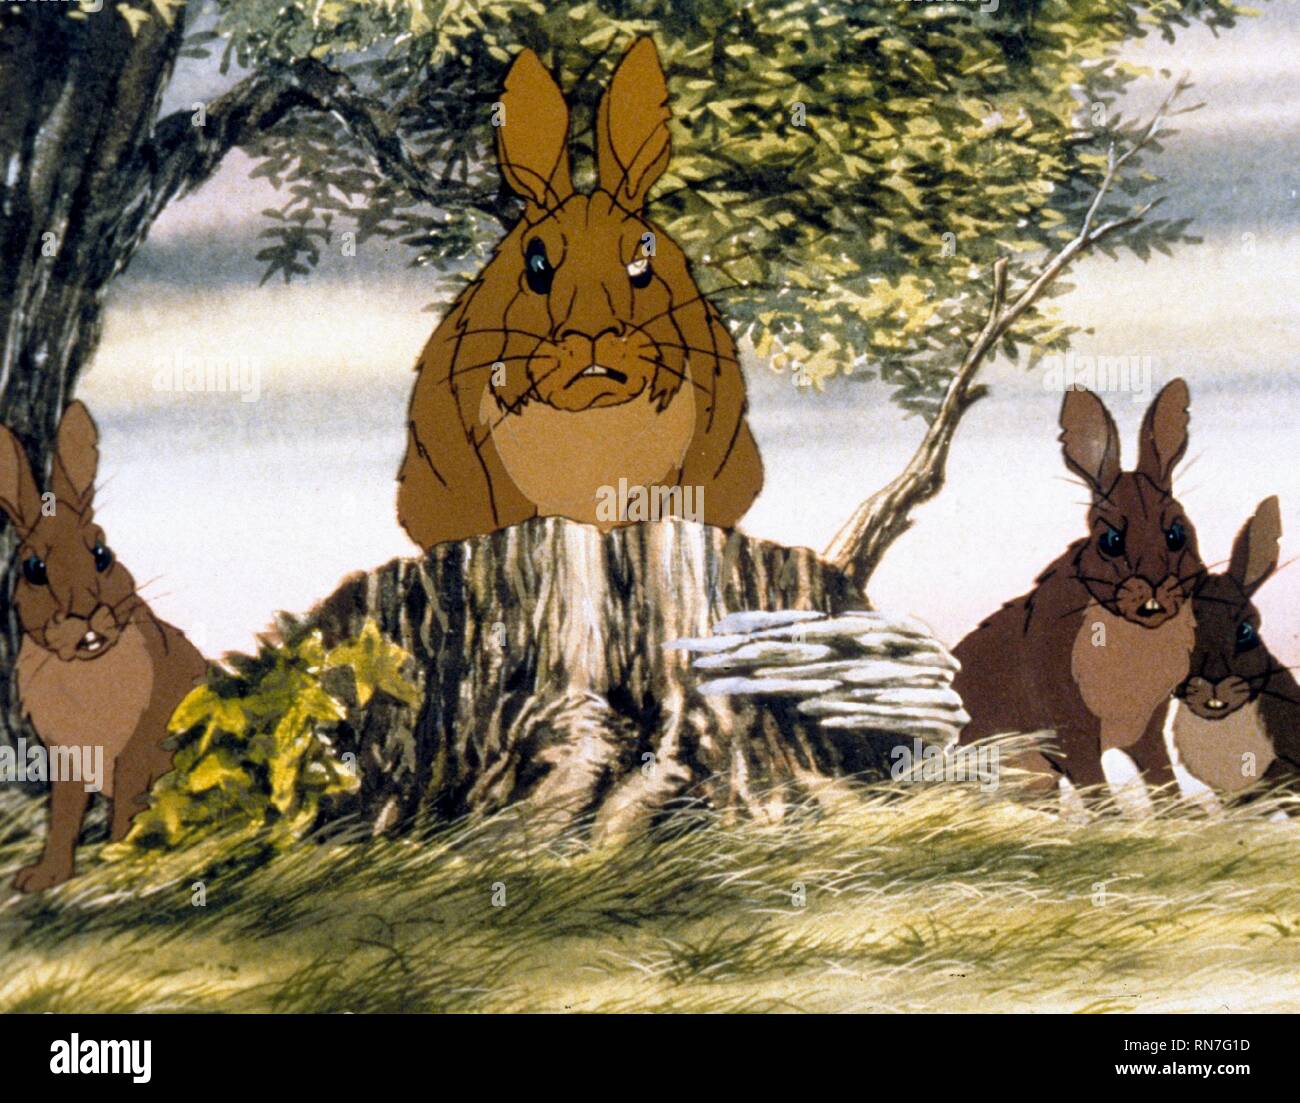 GENERAL WOUNDWORT, WATERSHIP DOWN, 1978 Stock Photo